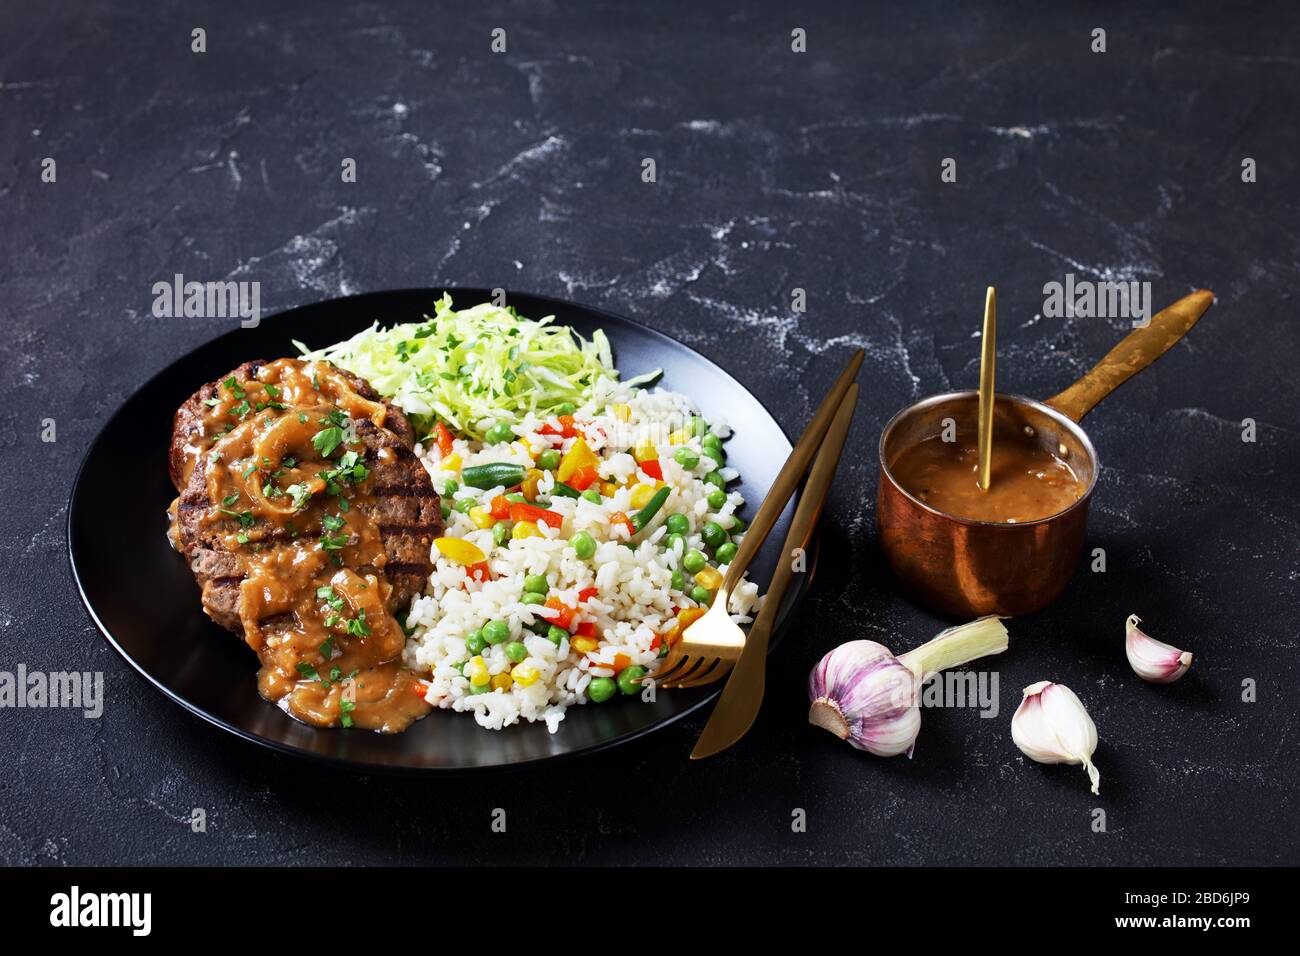 grilled ground beef steaks with onion gravy, coleslaw and rice mixed with vegetables on a black plate on a concrete table, horizontal view from above Stock Photo